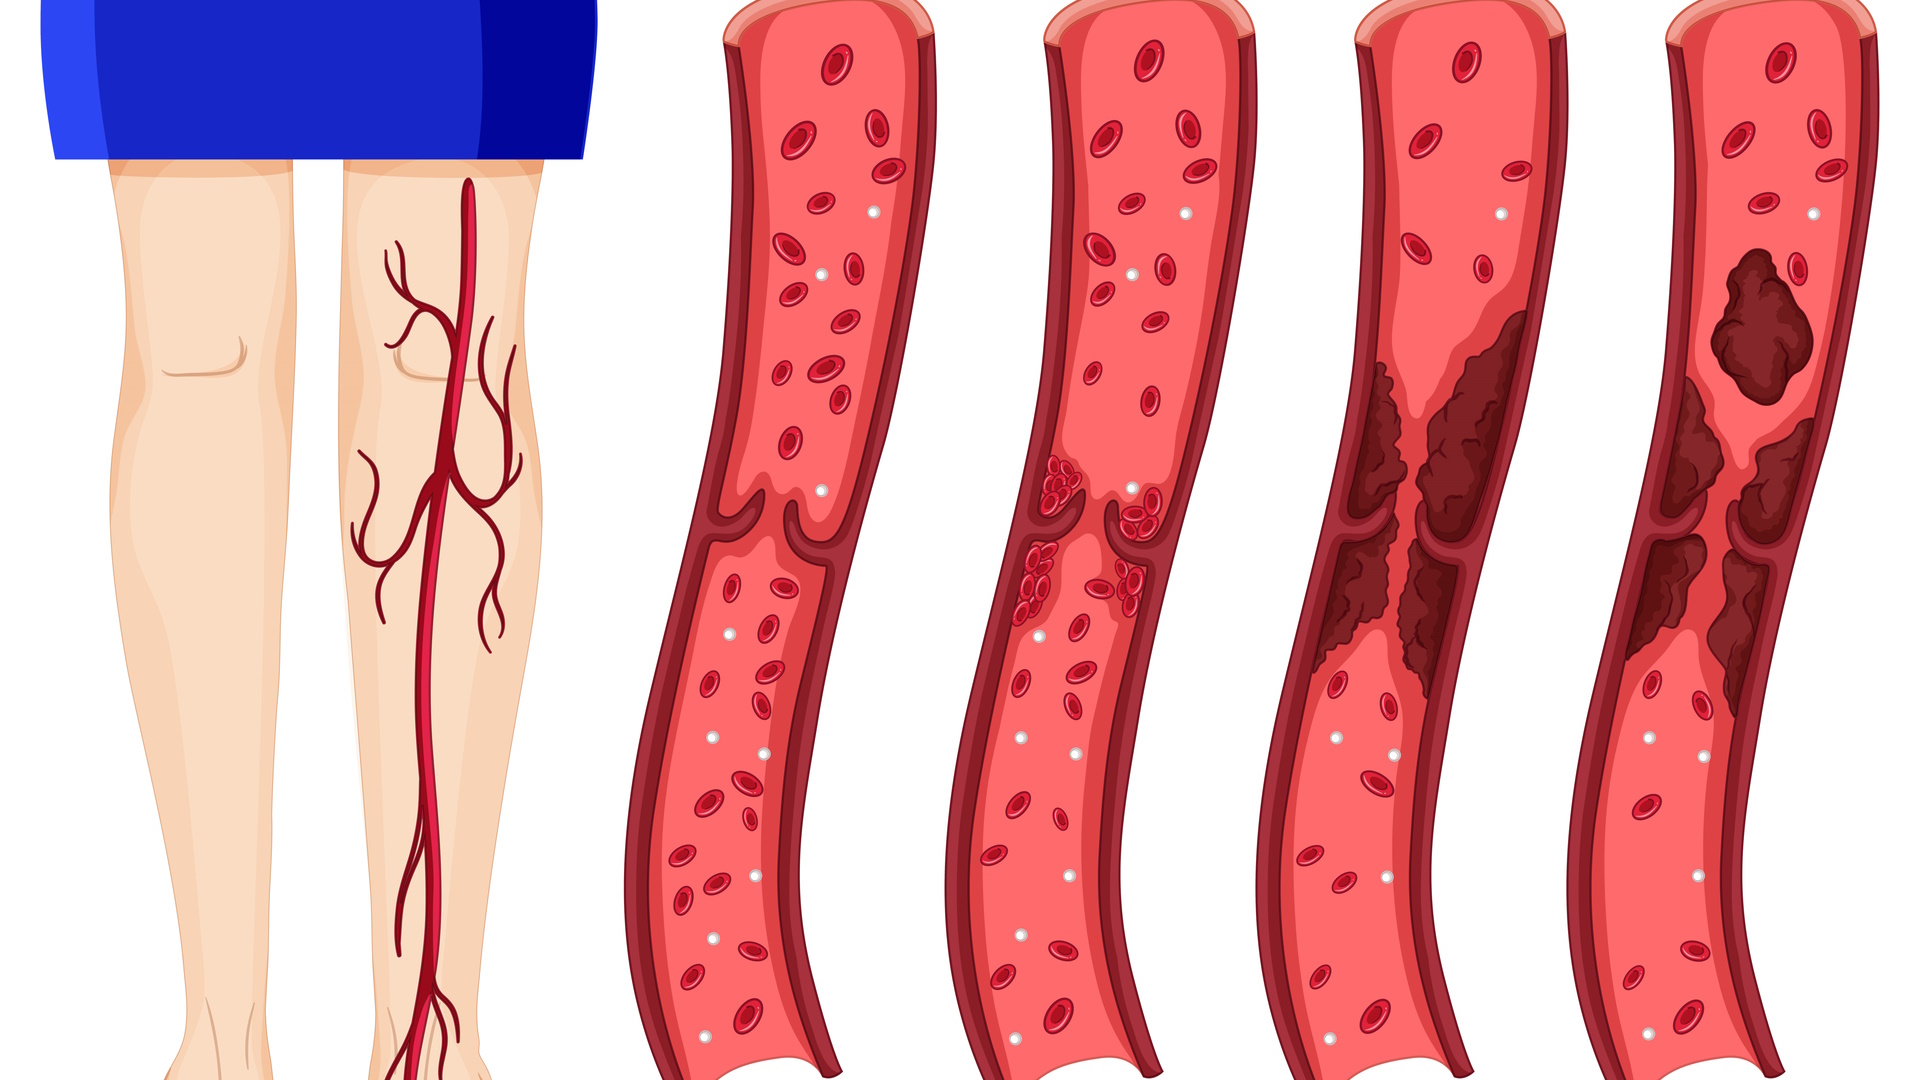 Deep Vein Thrombosis (DVT): Causes, symptoms and how to prevent this silent  threat